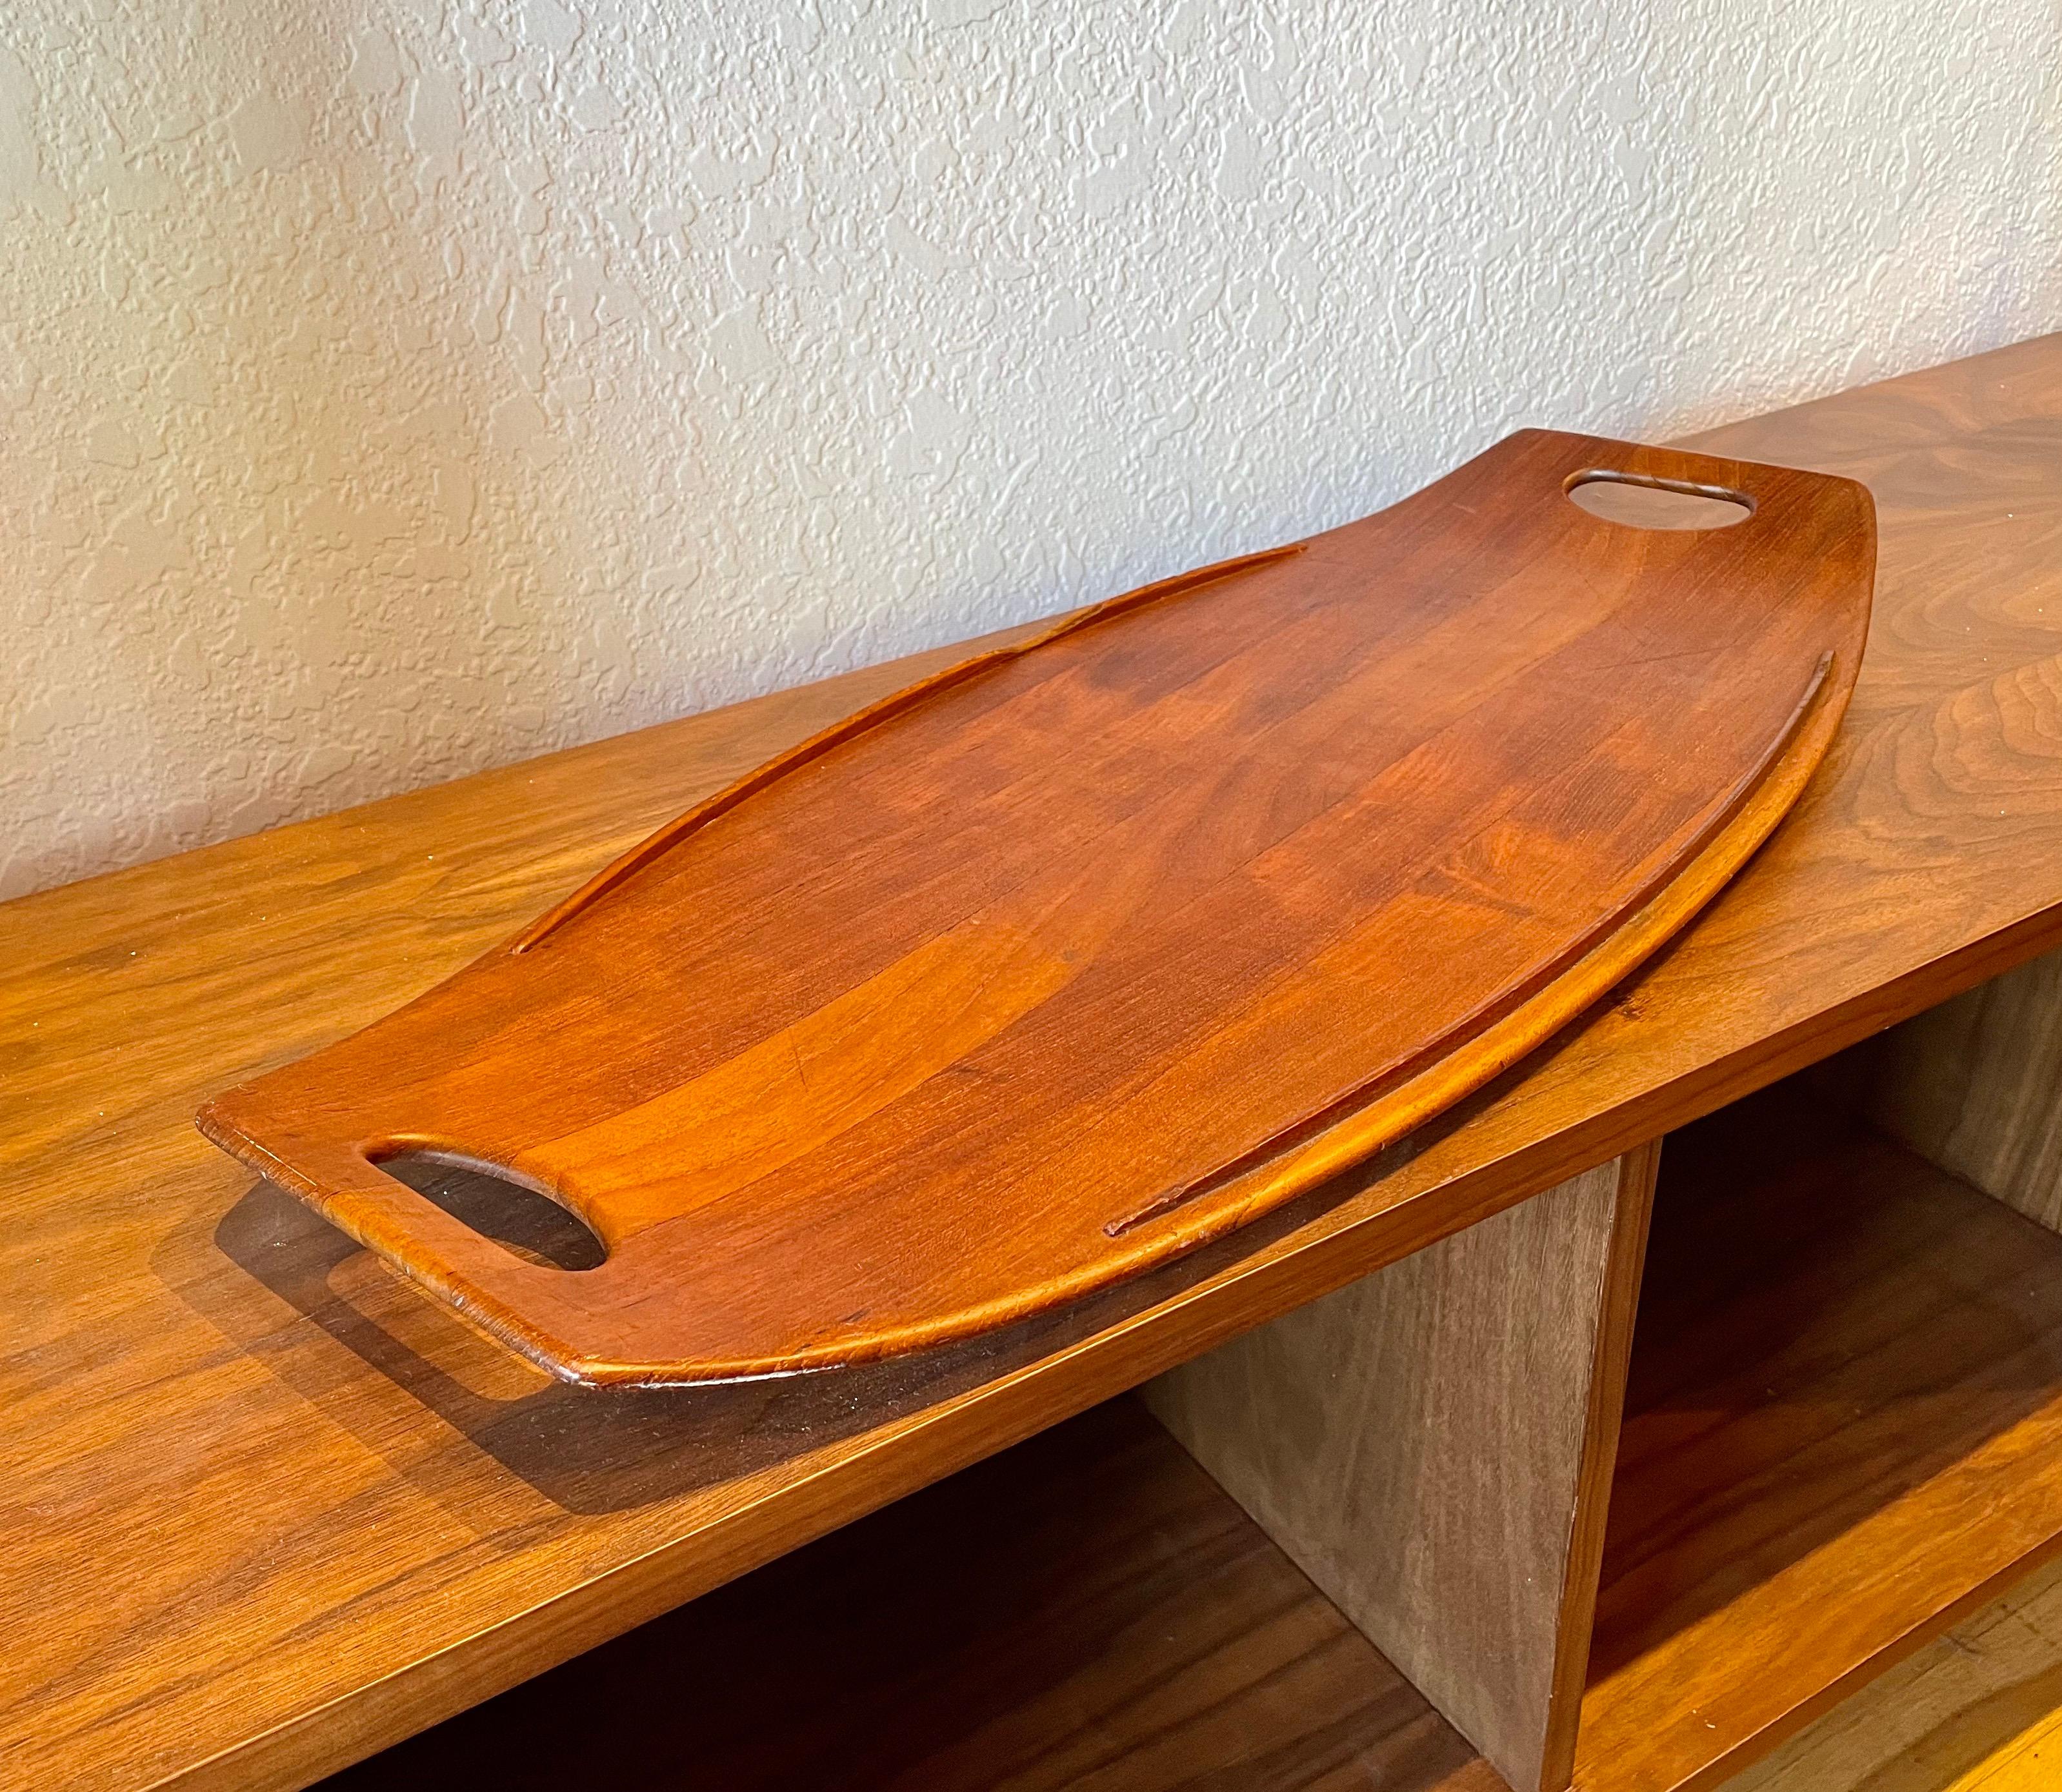 Solid Xlarge Teak Gondola Tray Designed by Quistgaard for Dansk Early Production In Fair Condition For Sale In San Diego, CA